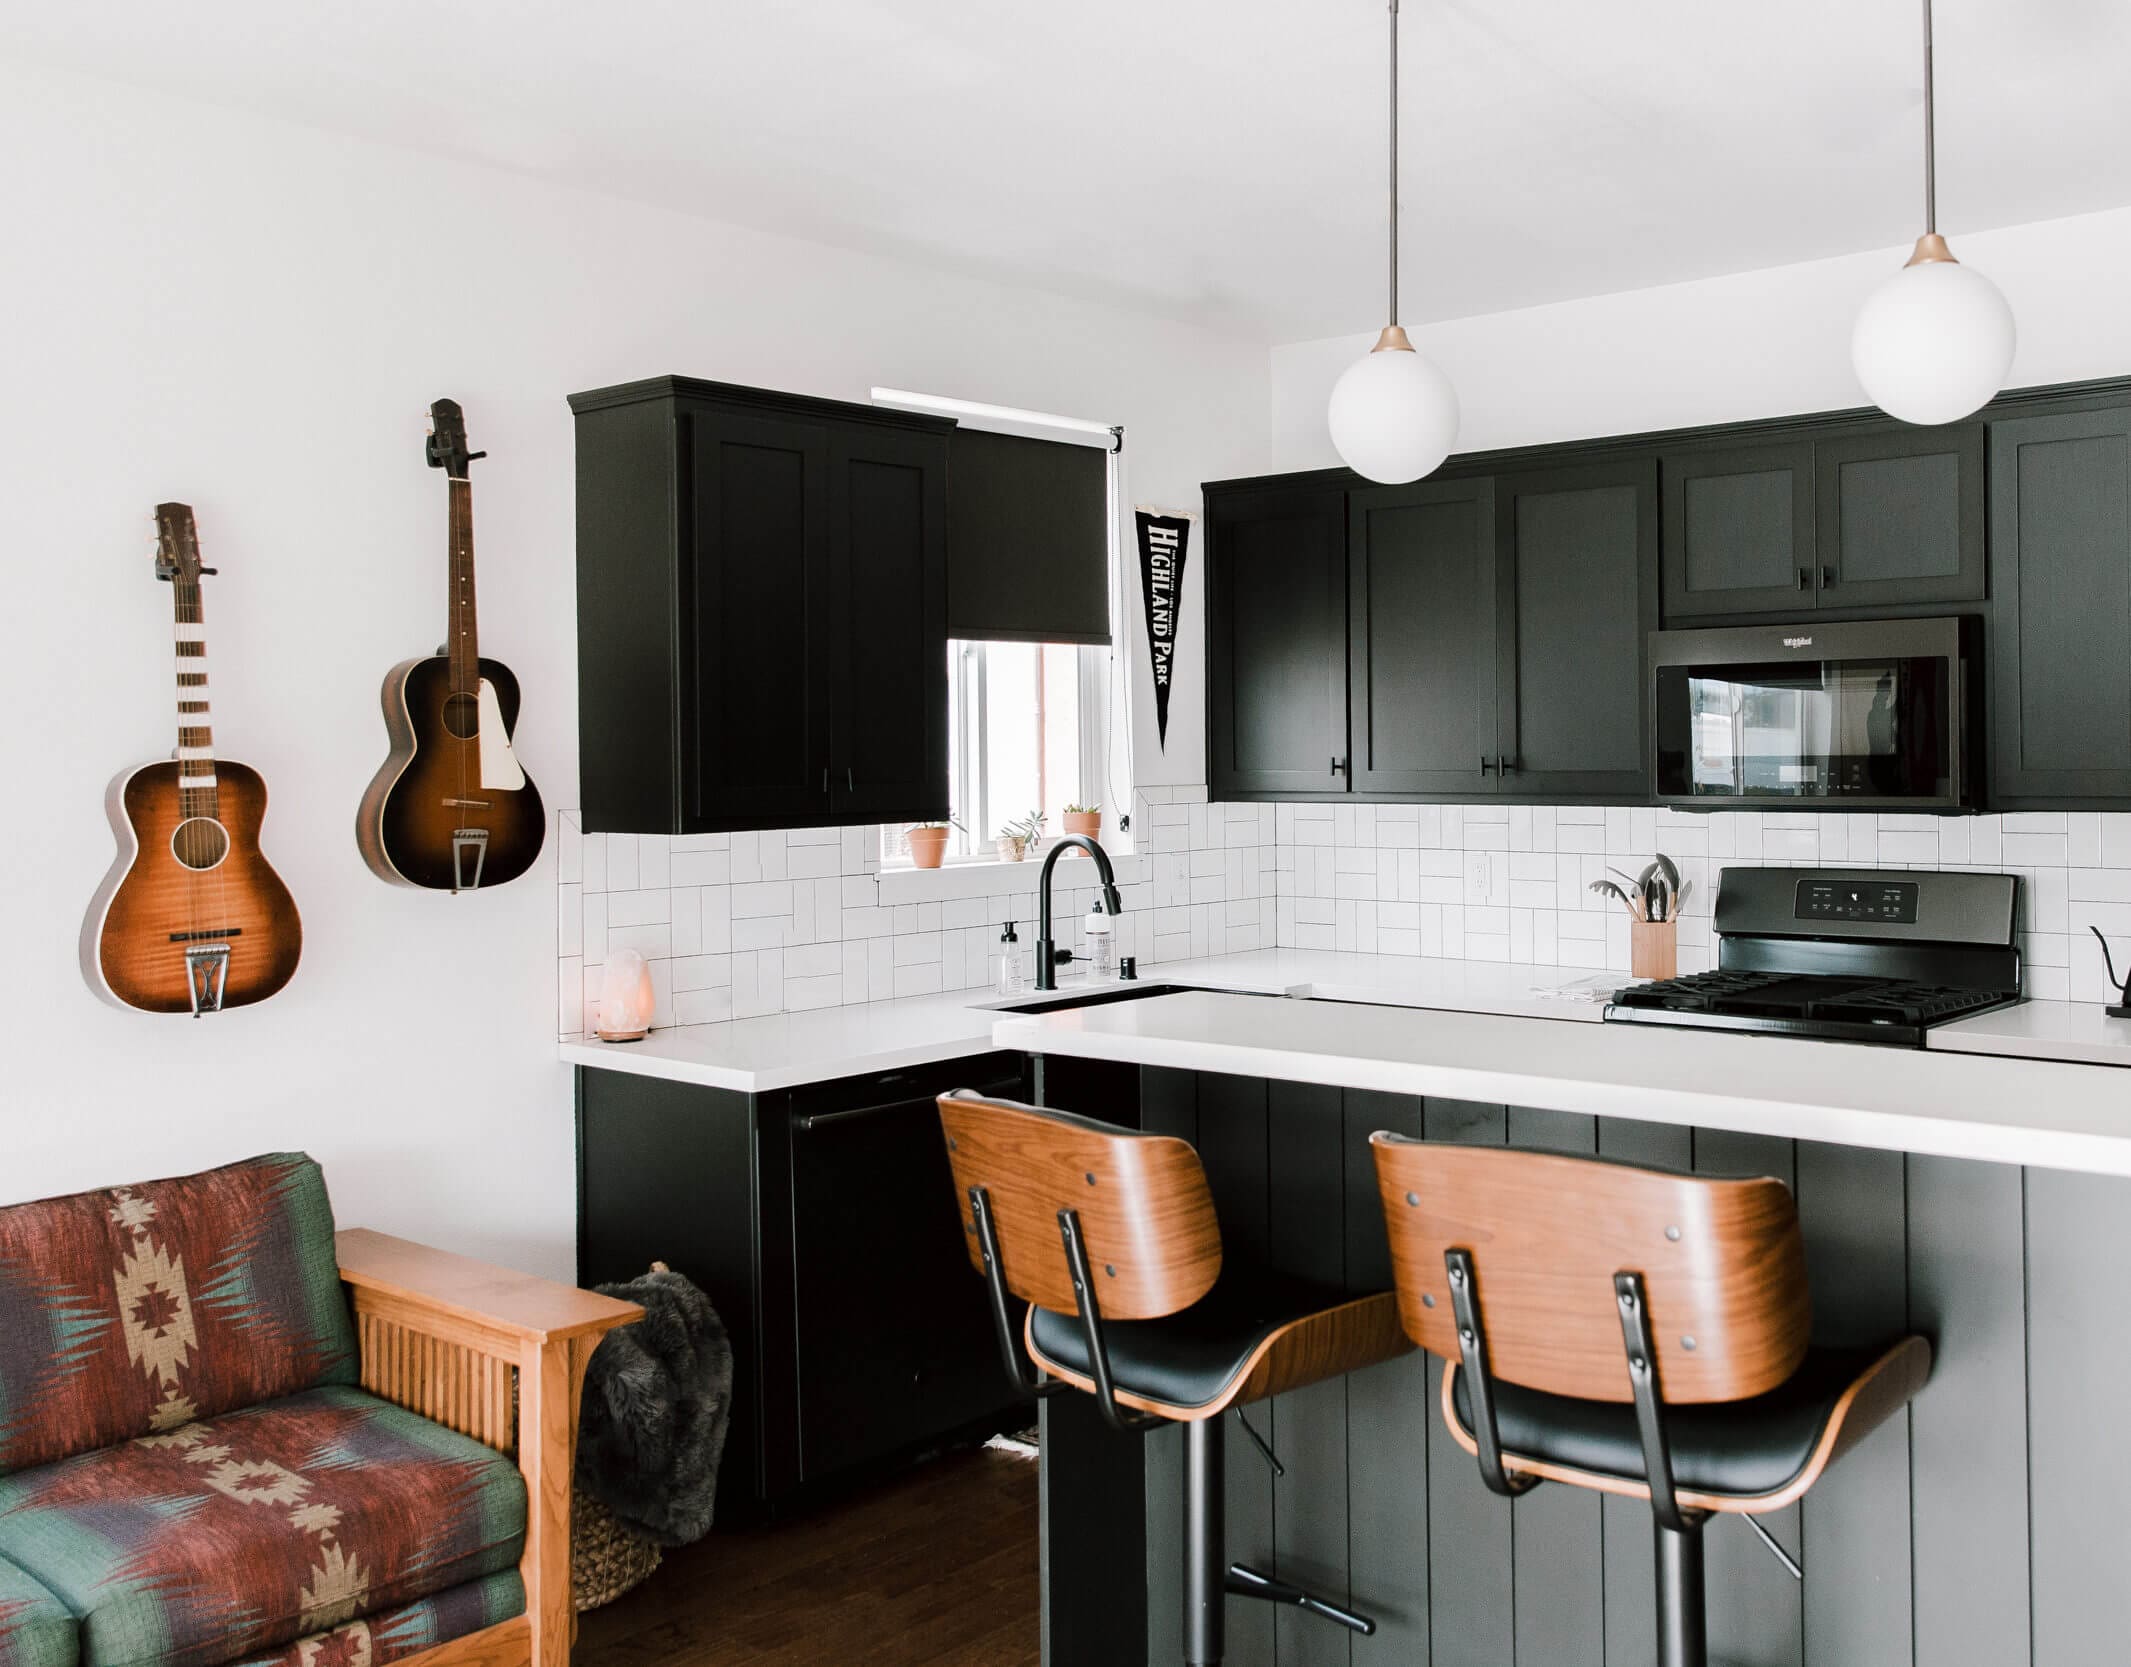 Modern designed kitchen with guitars on the wall